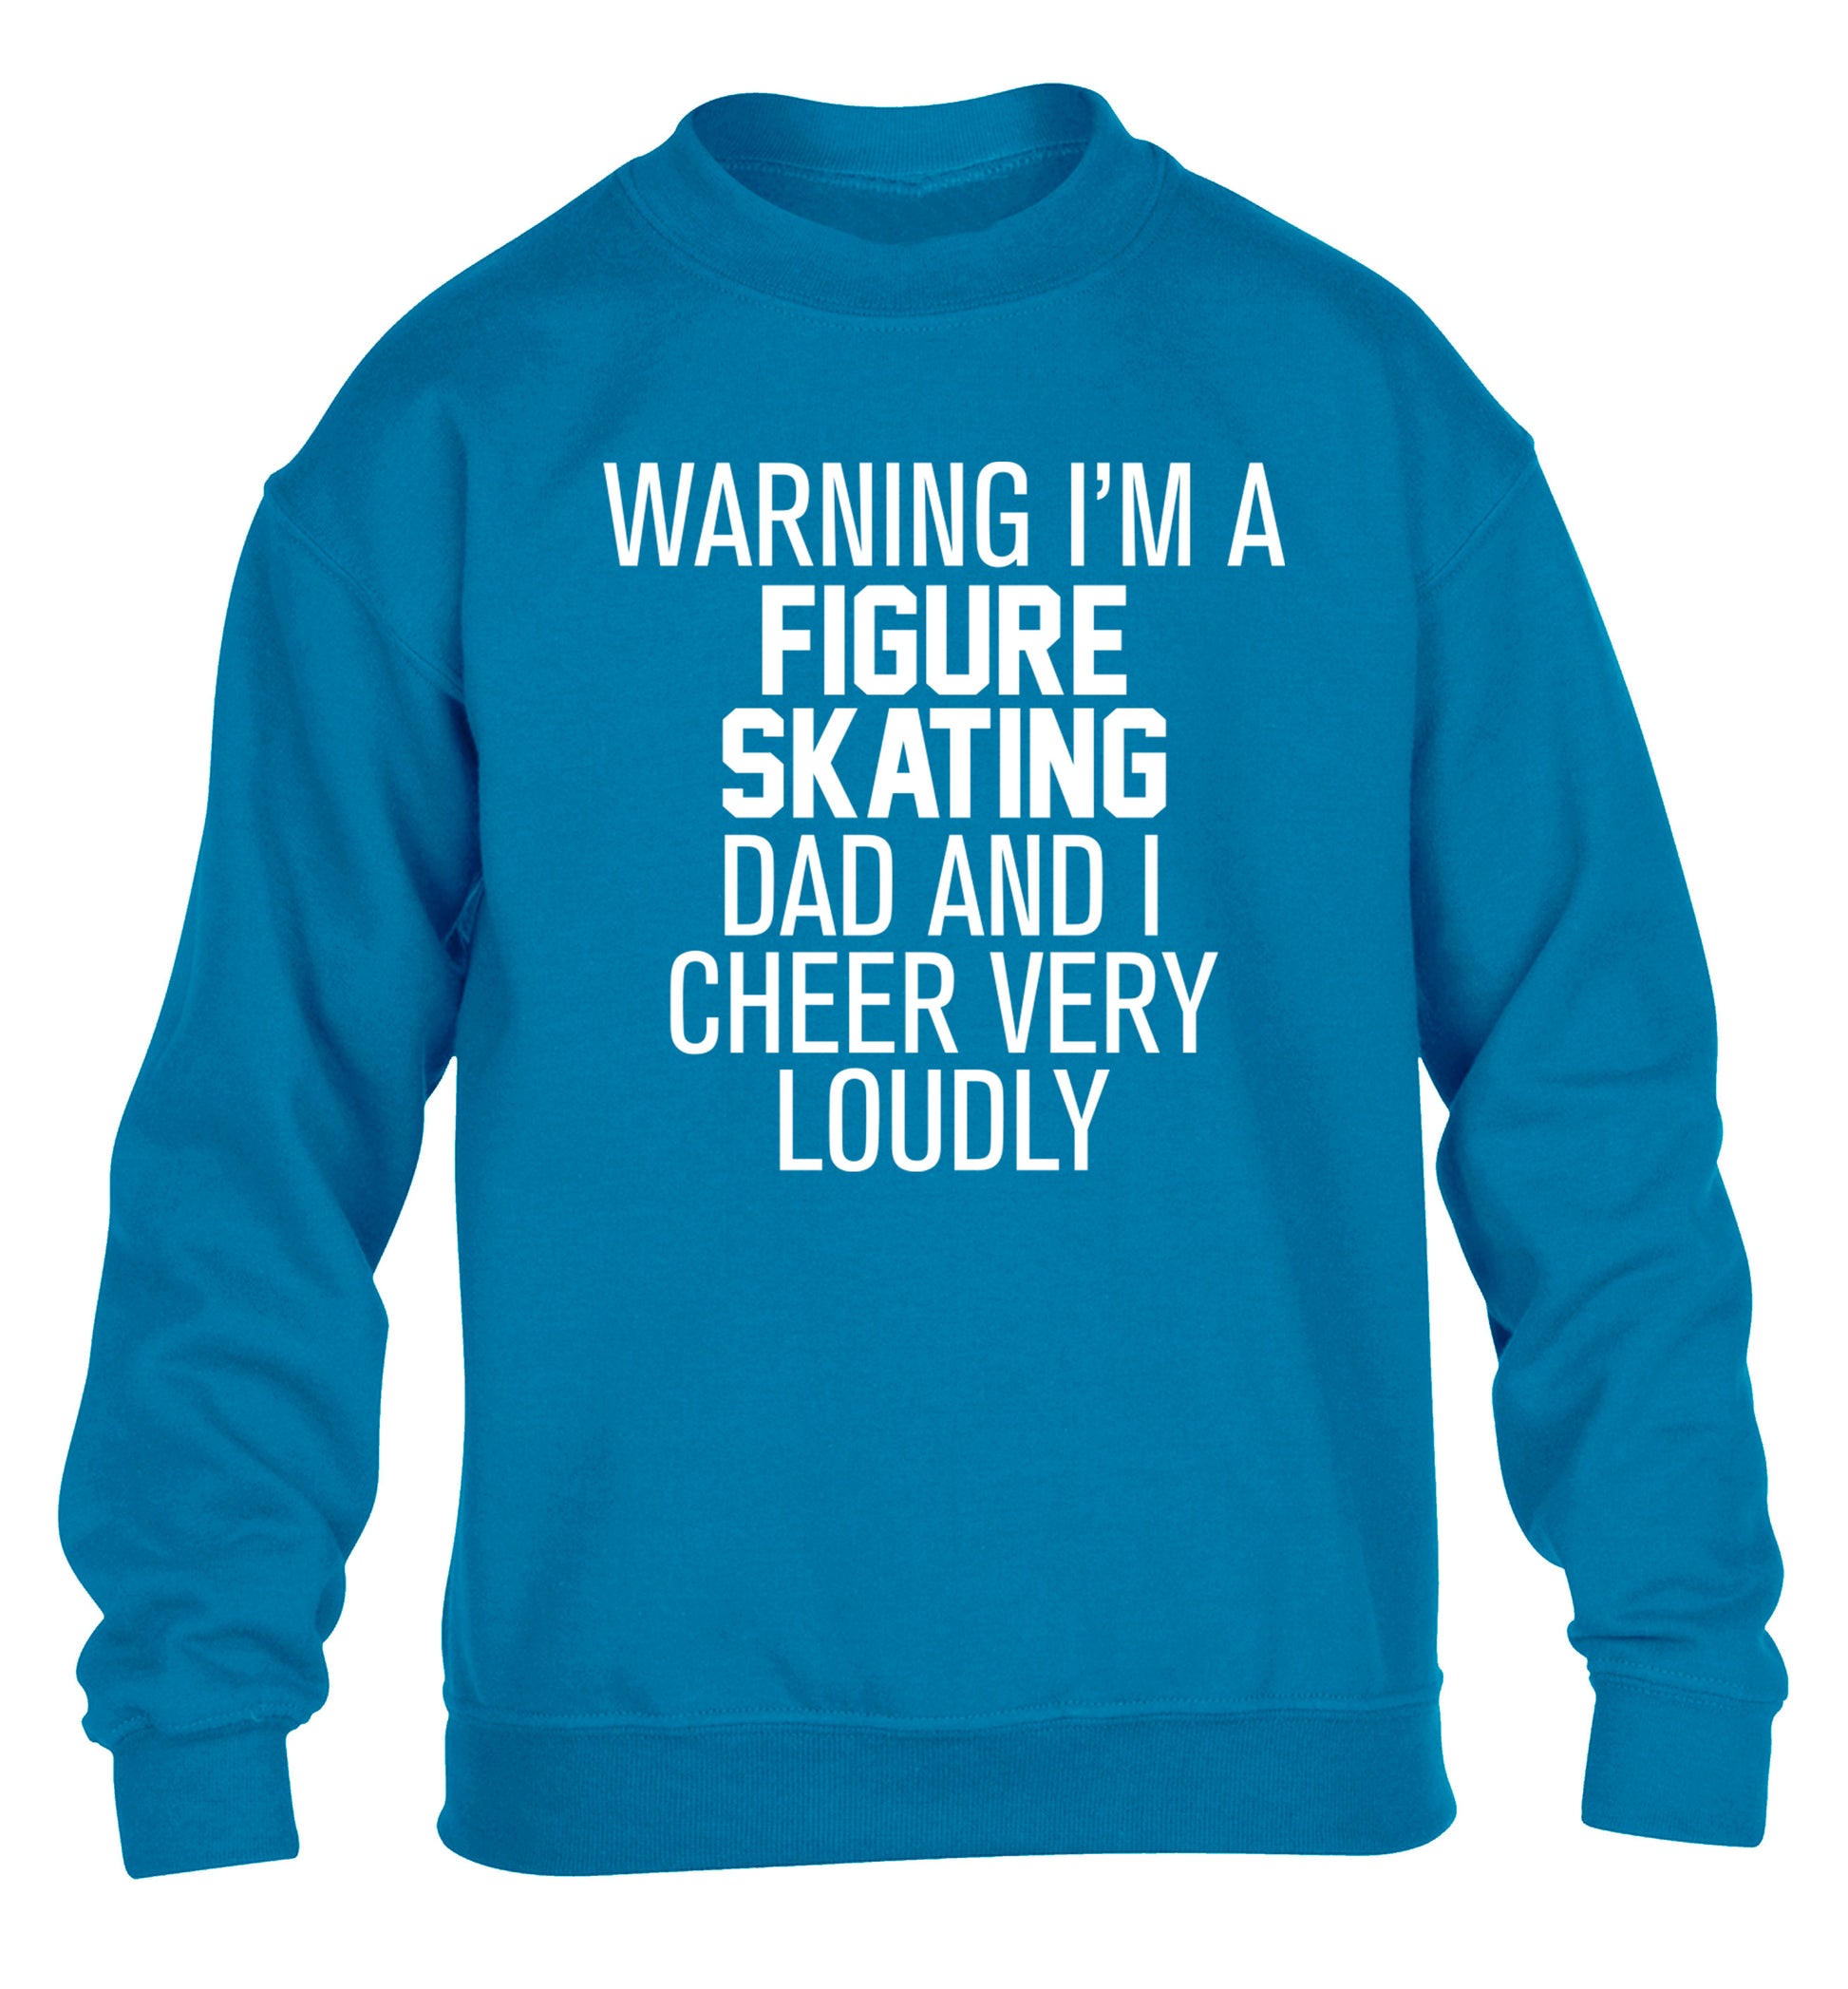 Warning I'm a figure skating dad and I cheer very loudly children's blue sweater 12-14 Years